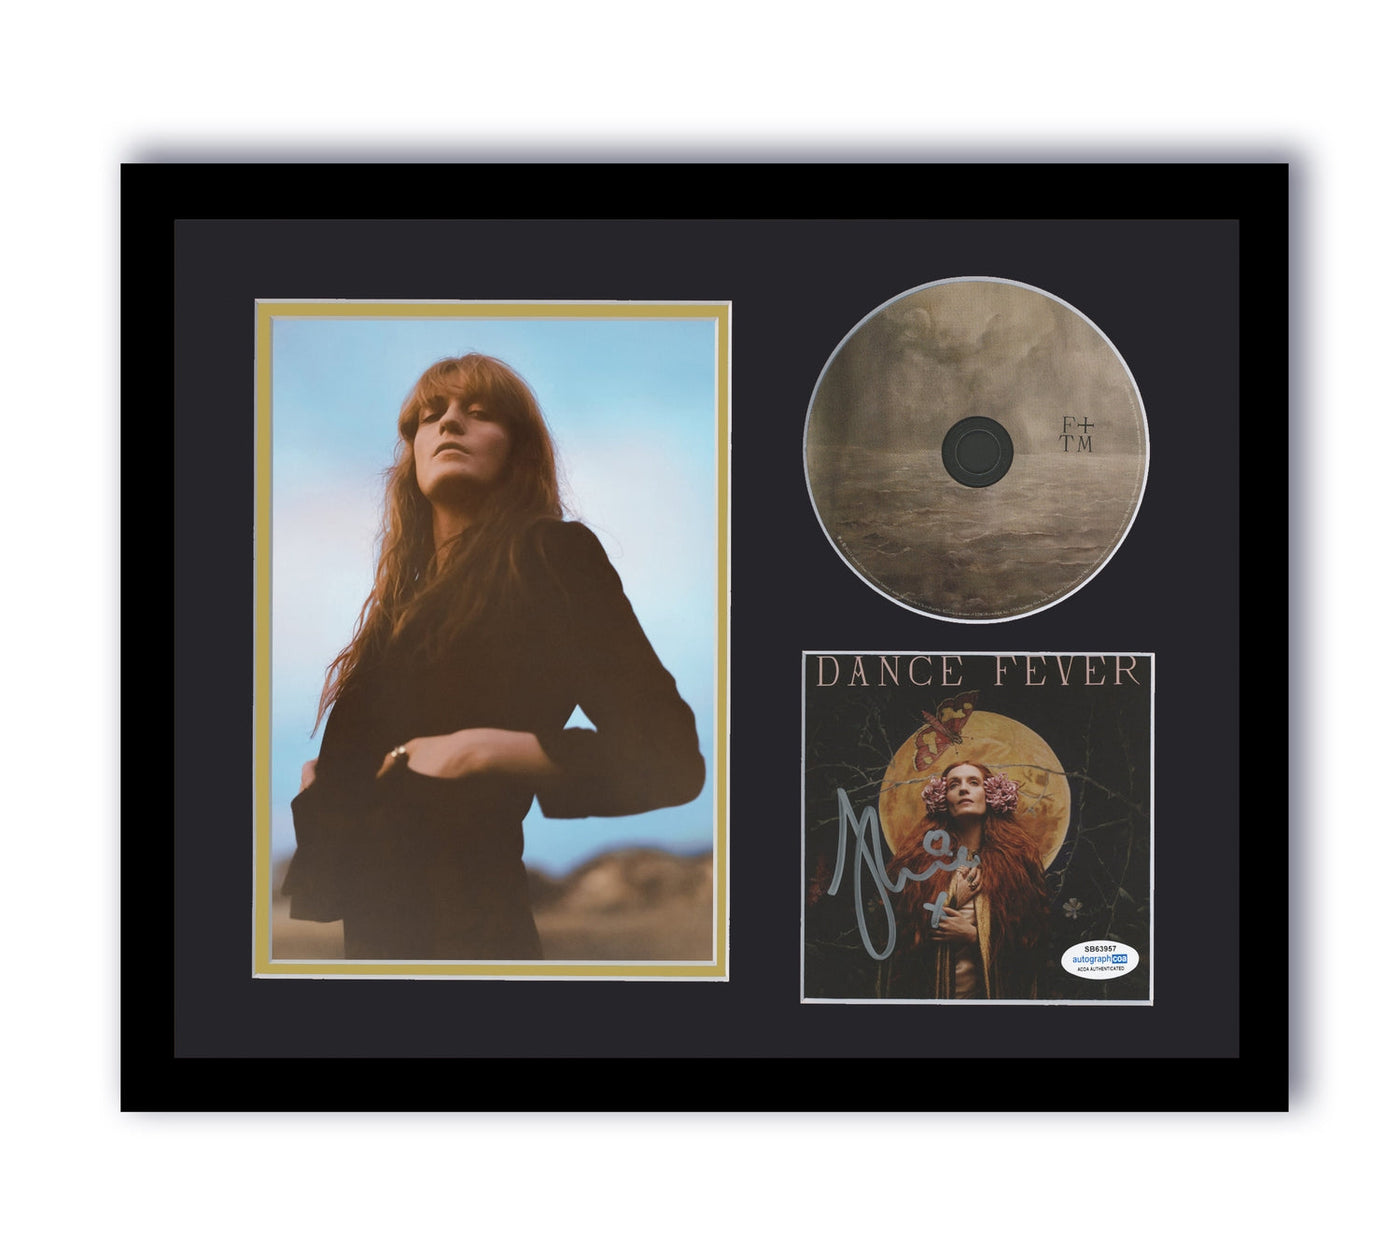 Florence Welch Signed 11x14 Framed CD Autographed Dance Fever ACOA 3